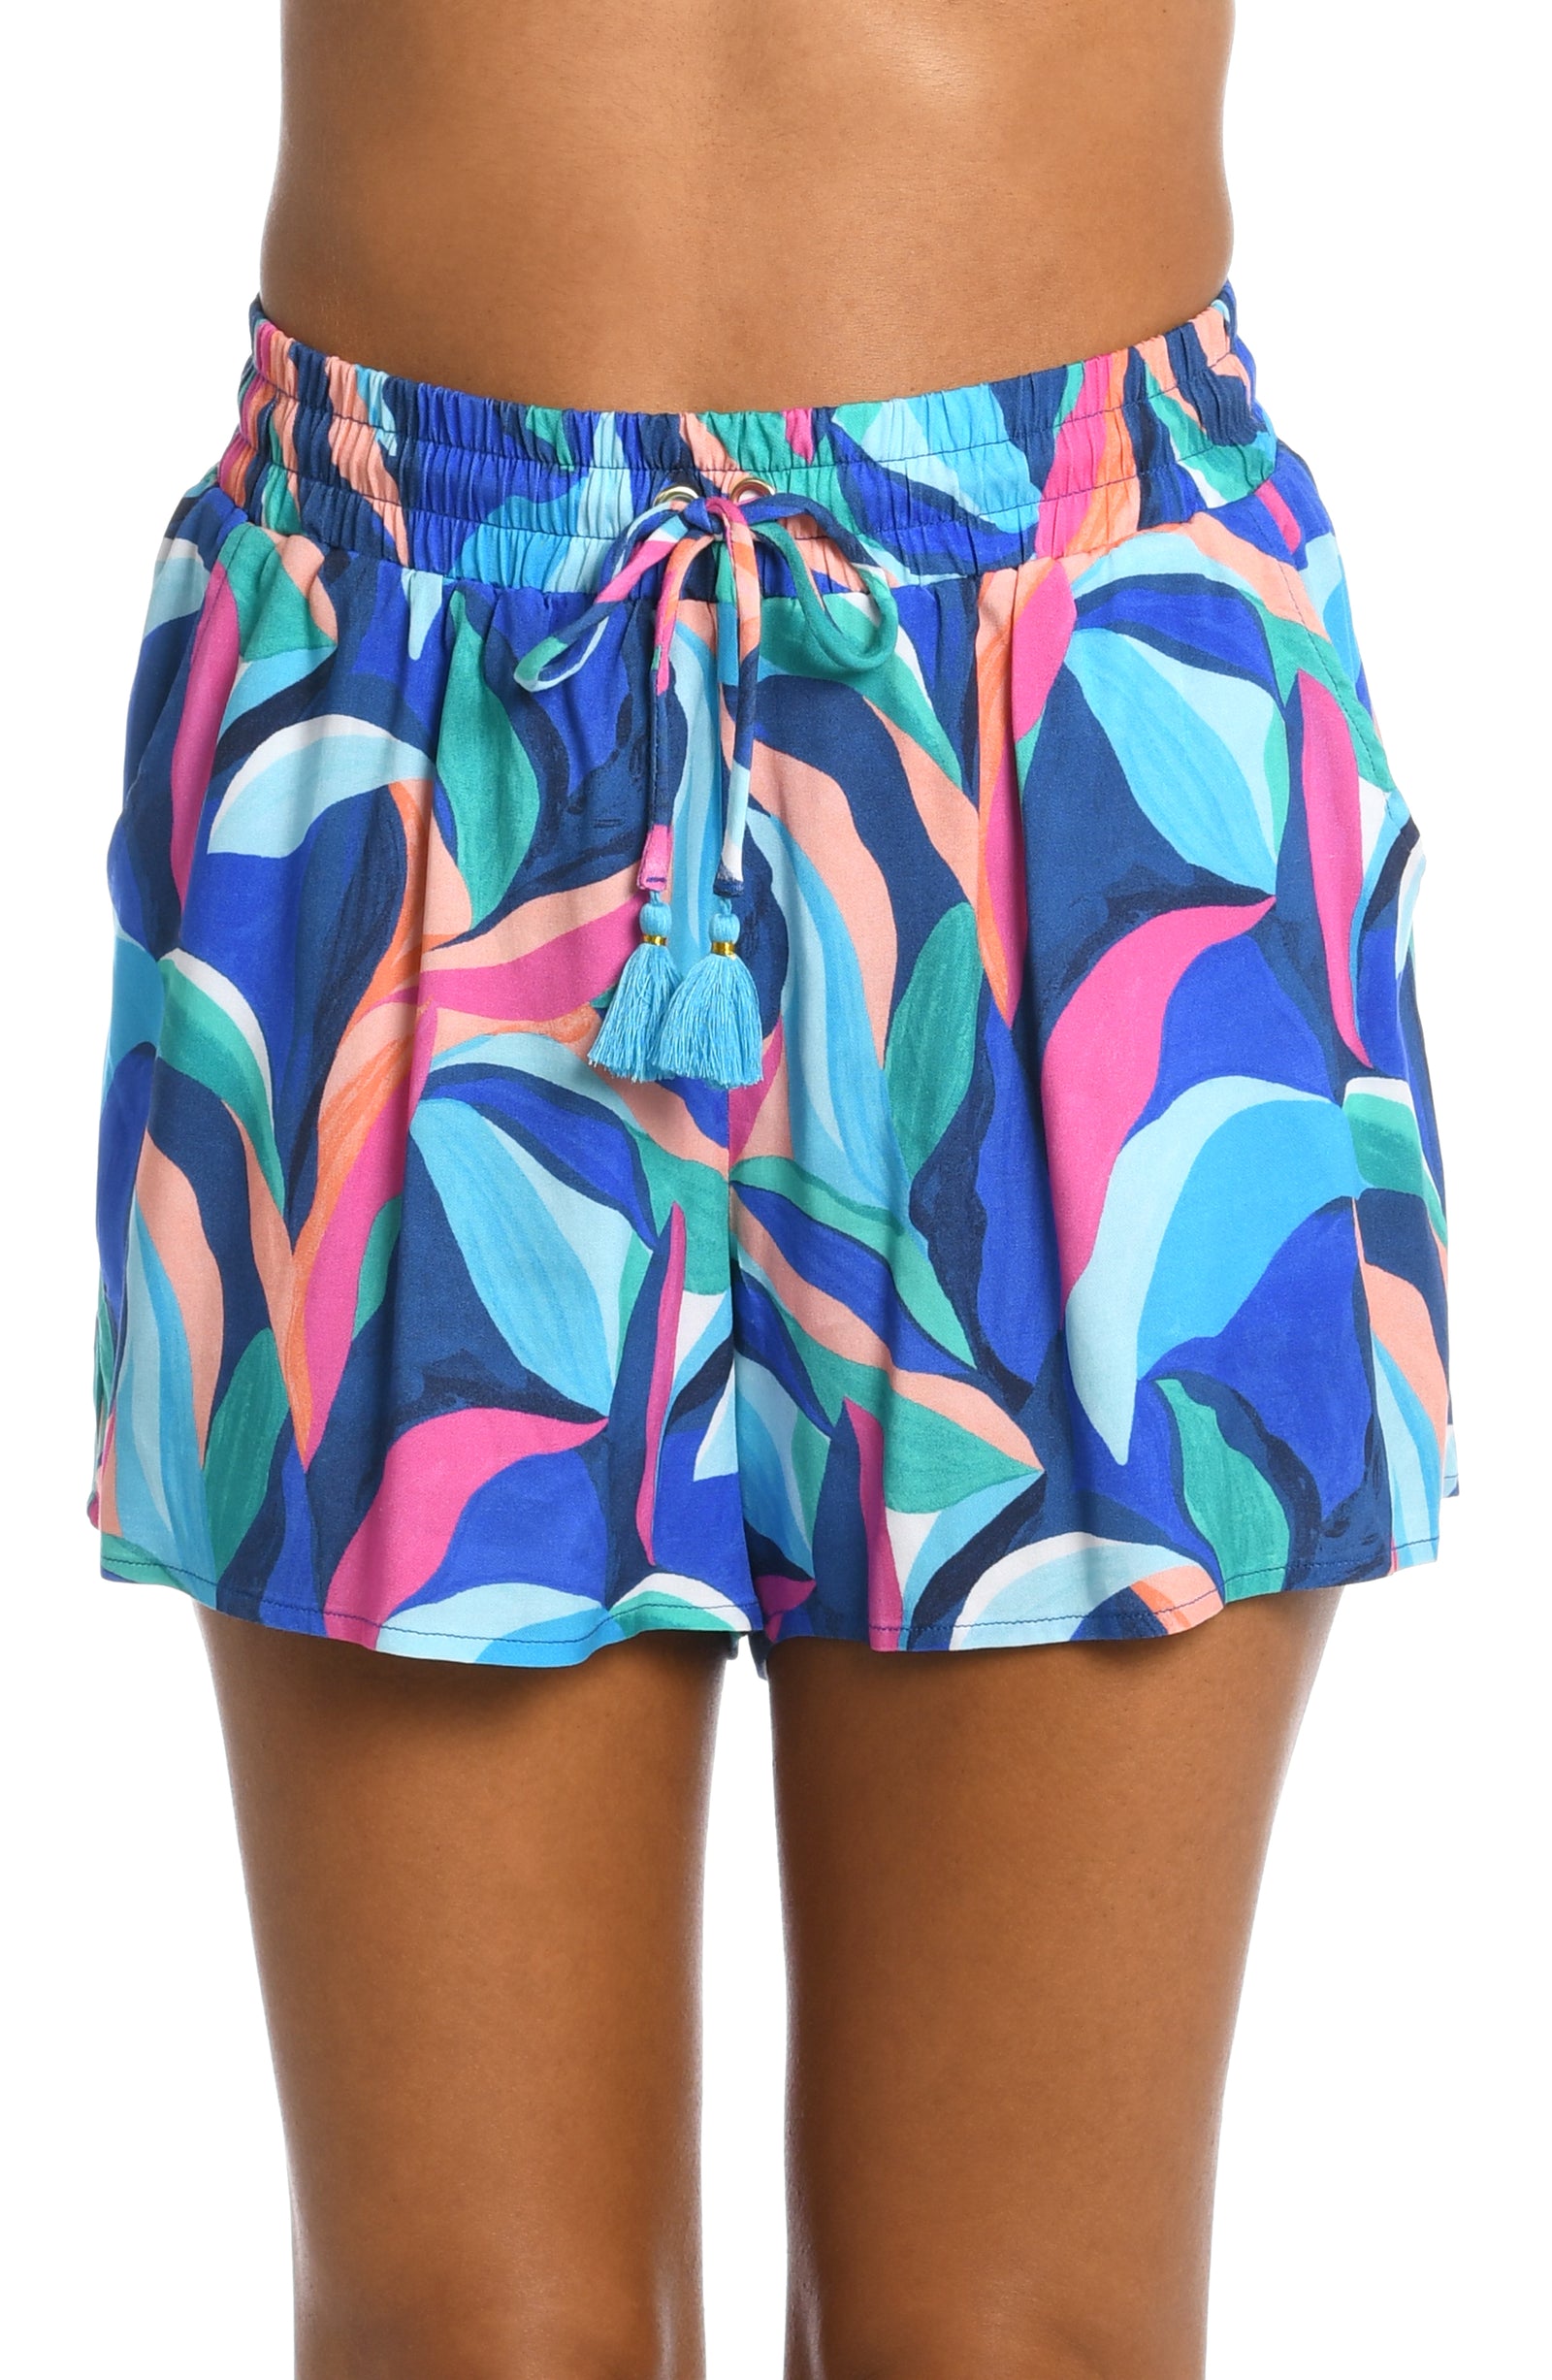 Painted Leaves Collection  Beach Shorts with Pockets and Pink Tassel Cord   Fabric Content: 100% Rayon Challis  Product#: LB3ZP64